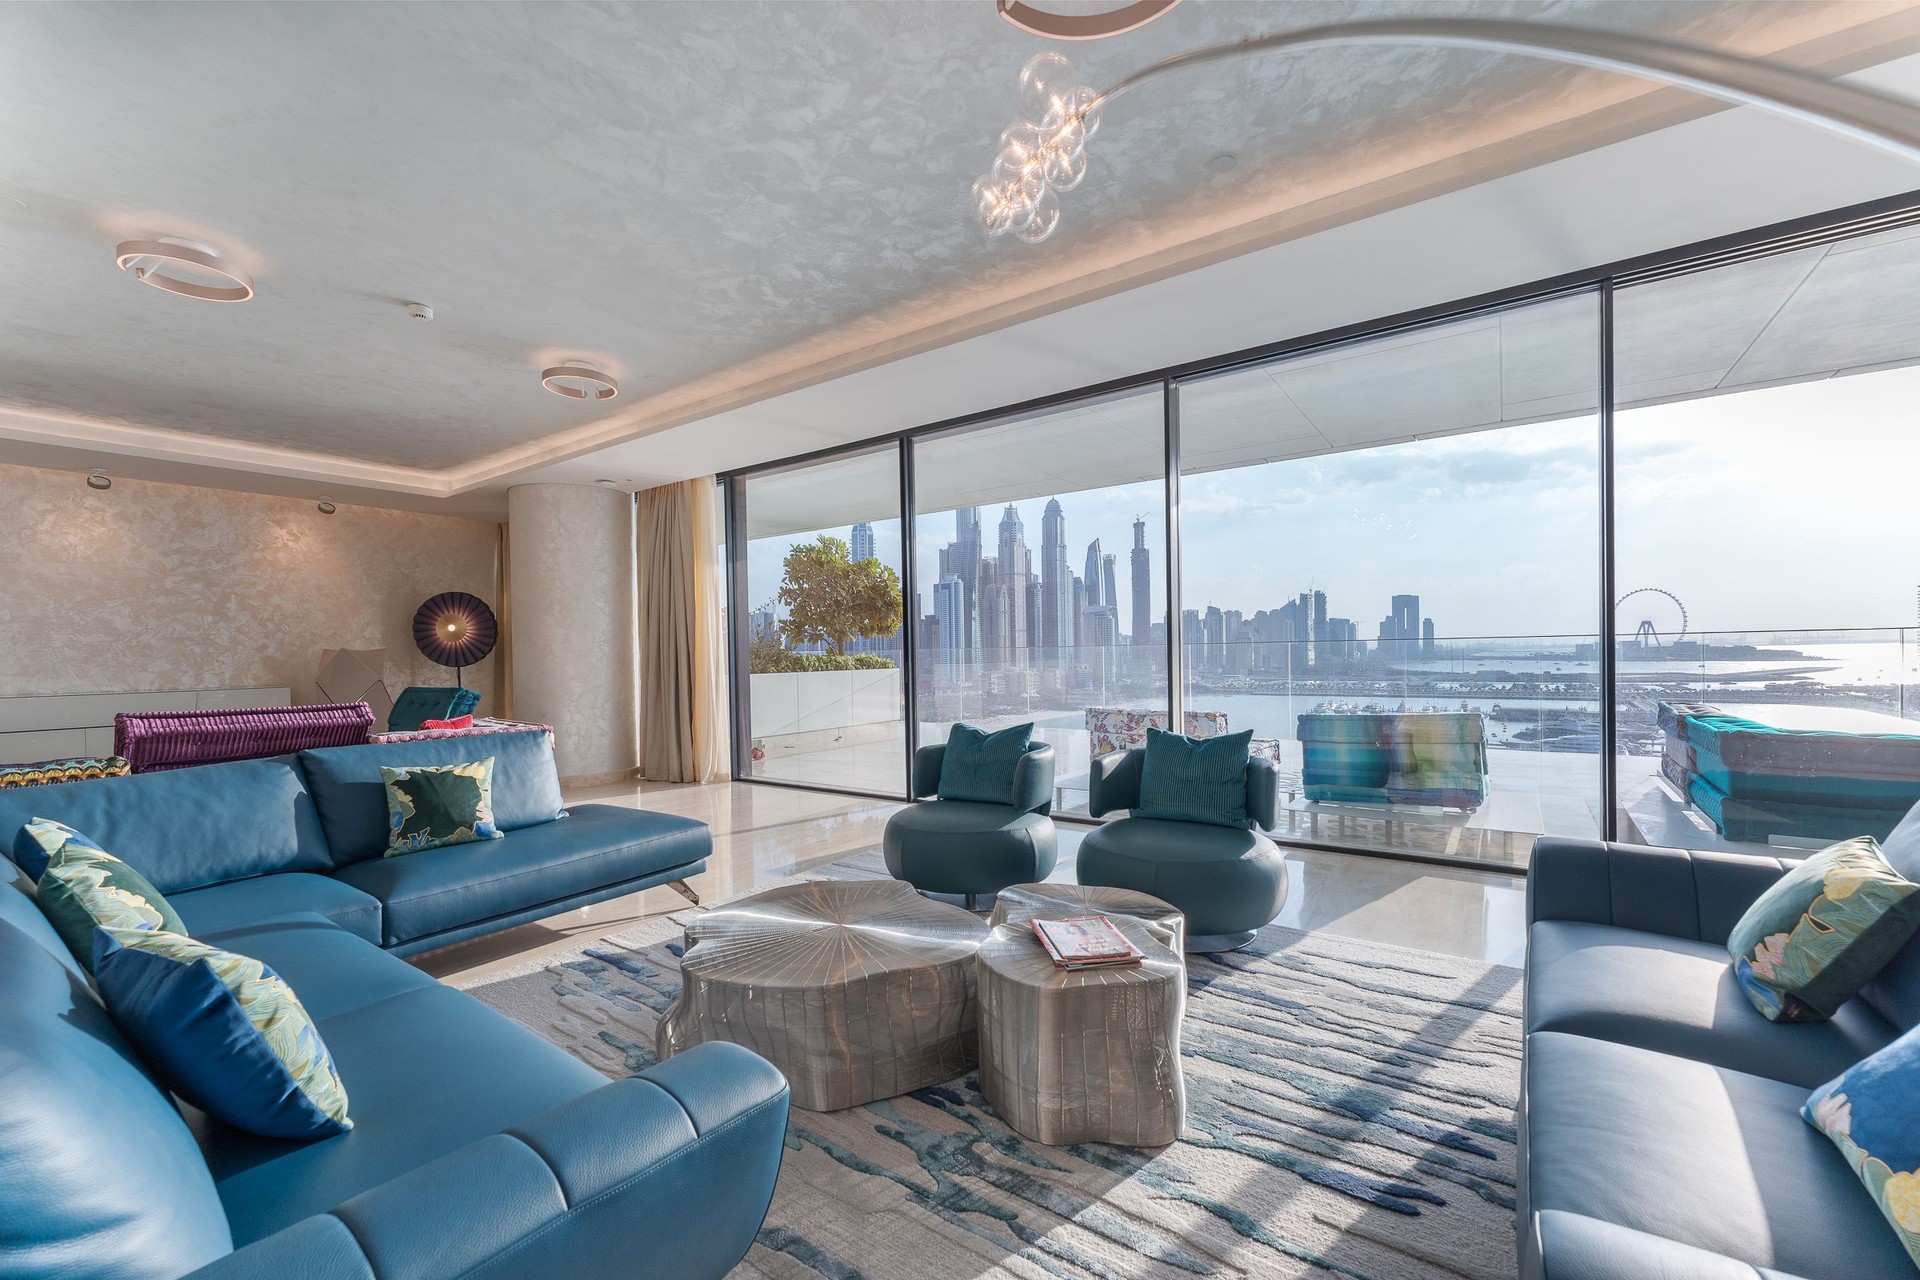 VIP Designer Penthouse in Waterfront Palm Jumeirah Residence: Image 1